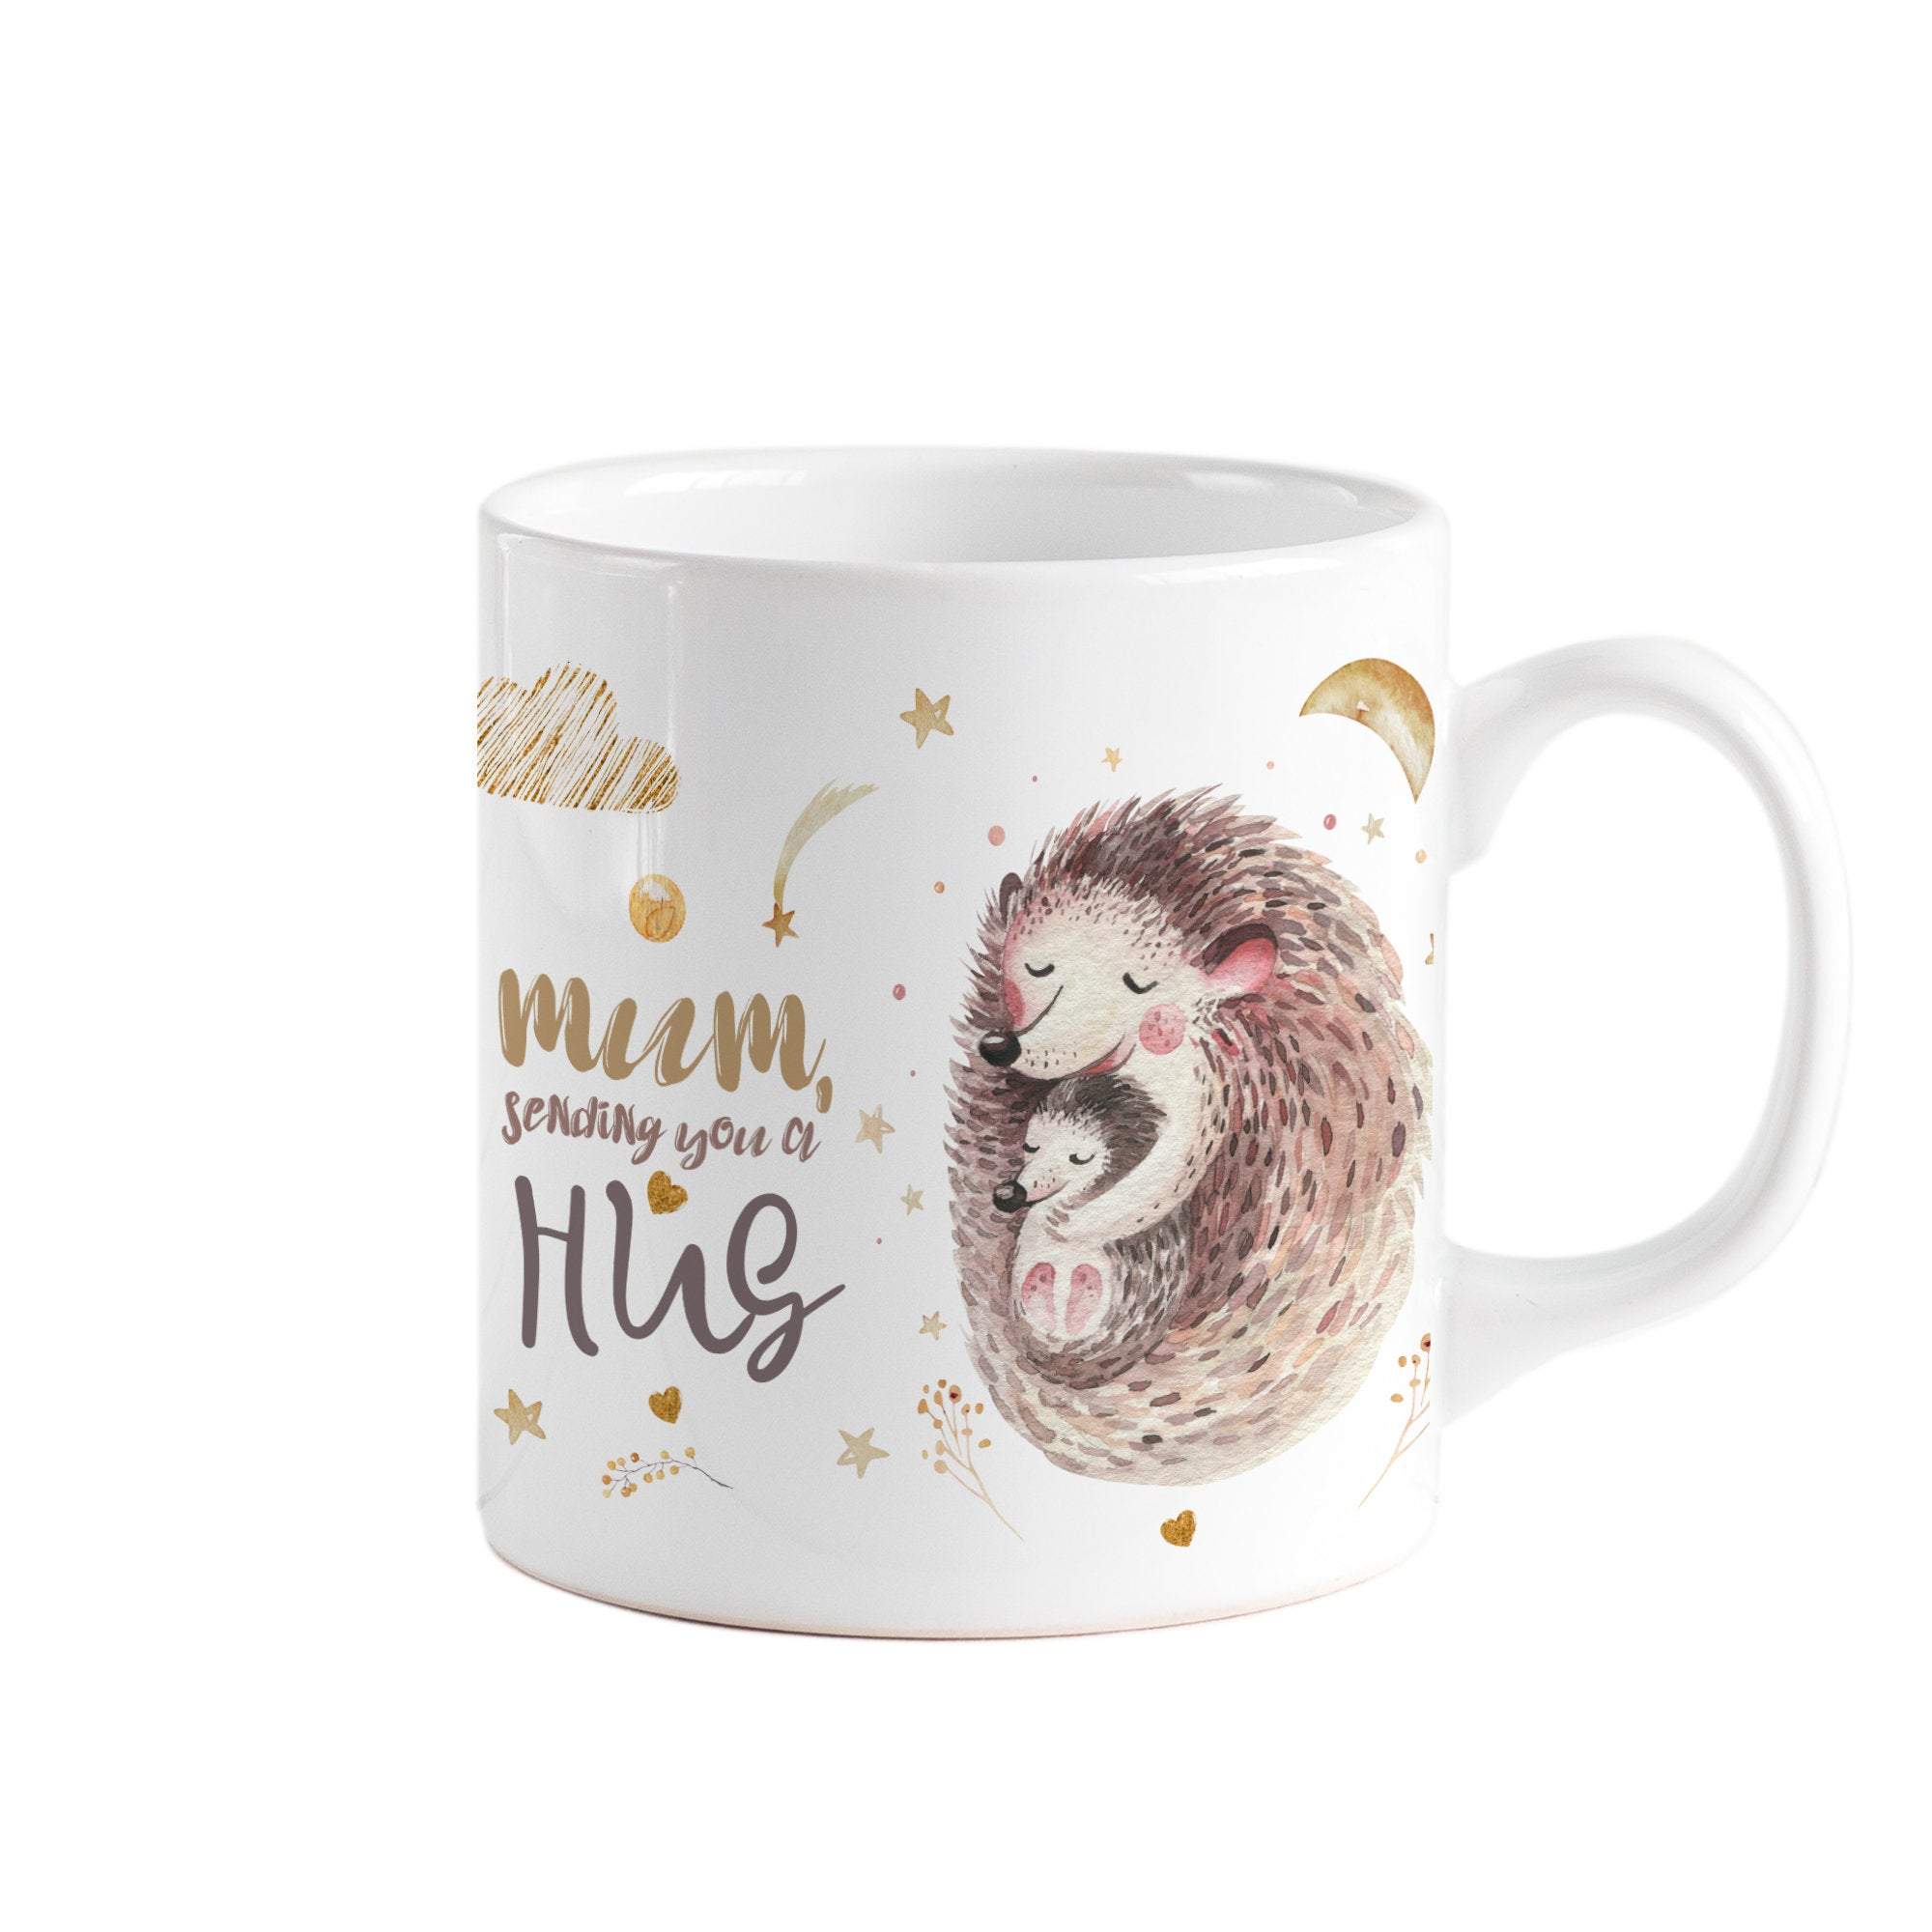 Mum sending you a hug mug, Cute Mother's Day Gift, Mother and baby, Mother Birthday Gift